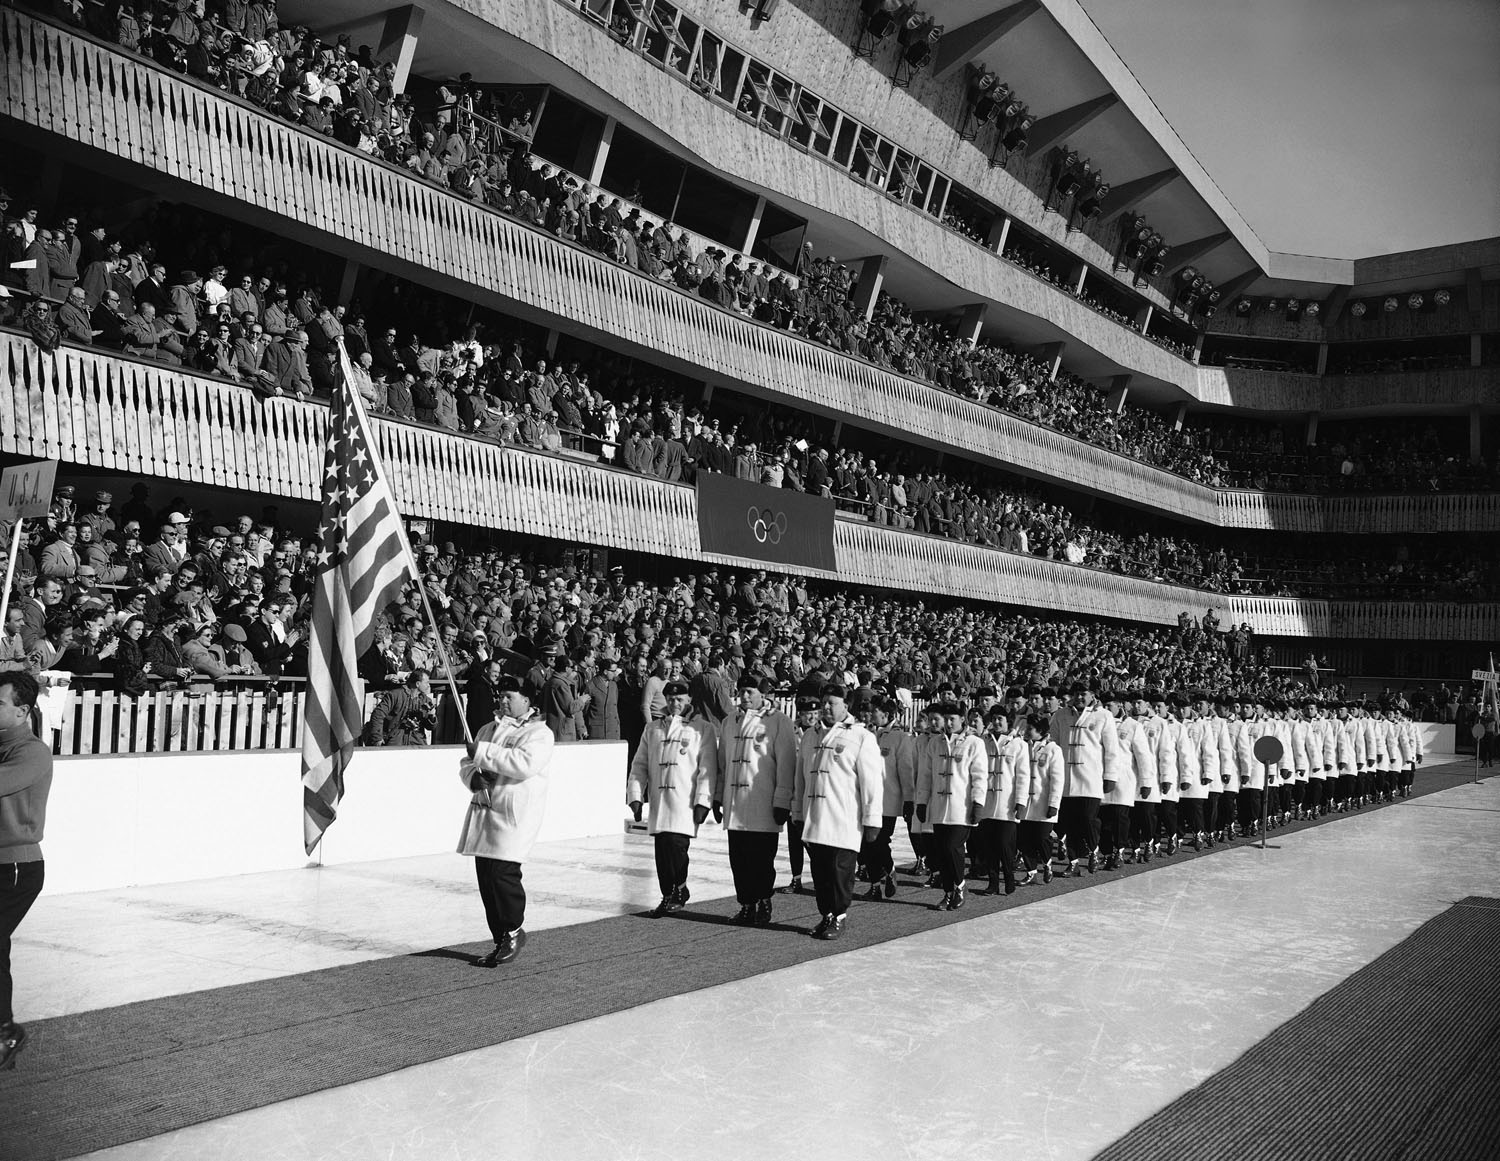 Jim Bickford, carries the U.S. flag again during the opening ceremonies for the 1956 Winter Olympic Games in Cortina D'Ampezzo, Italy.